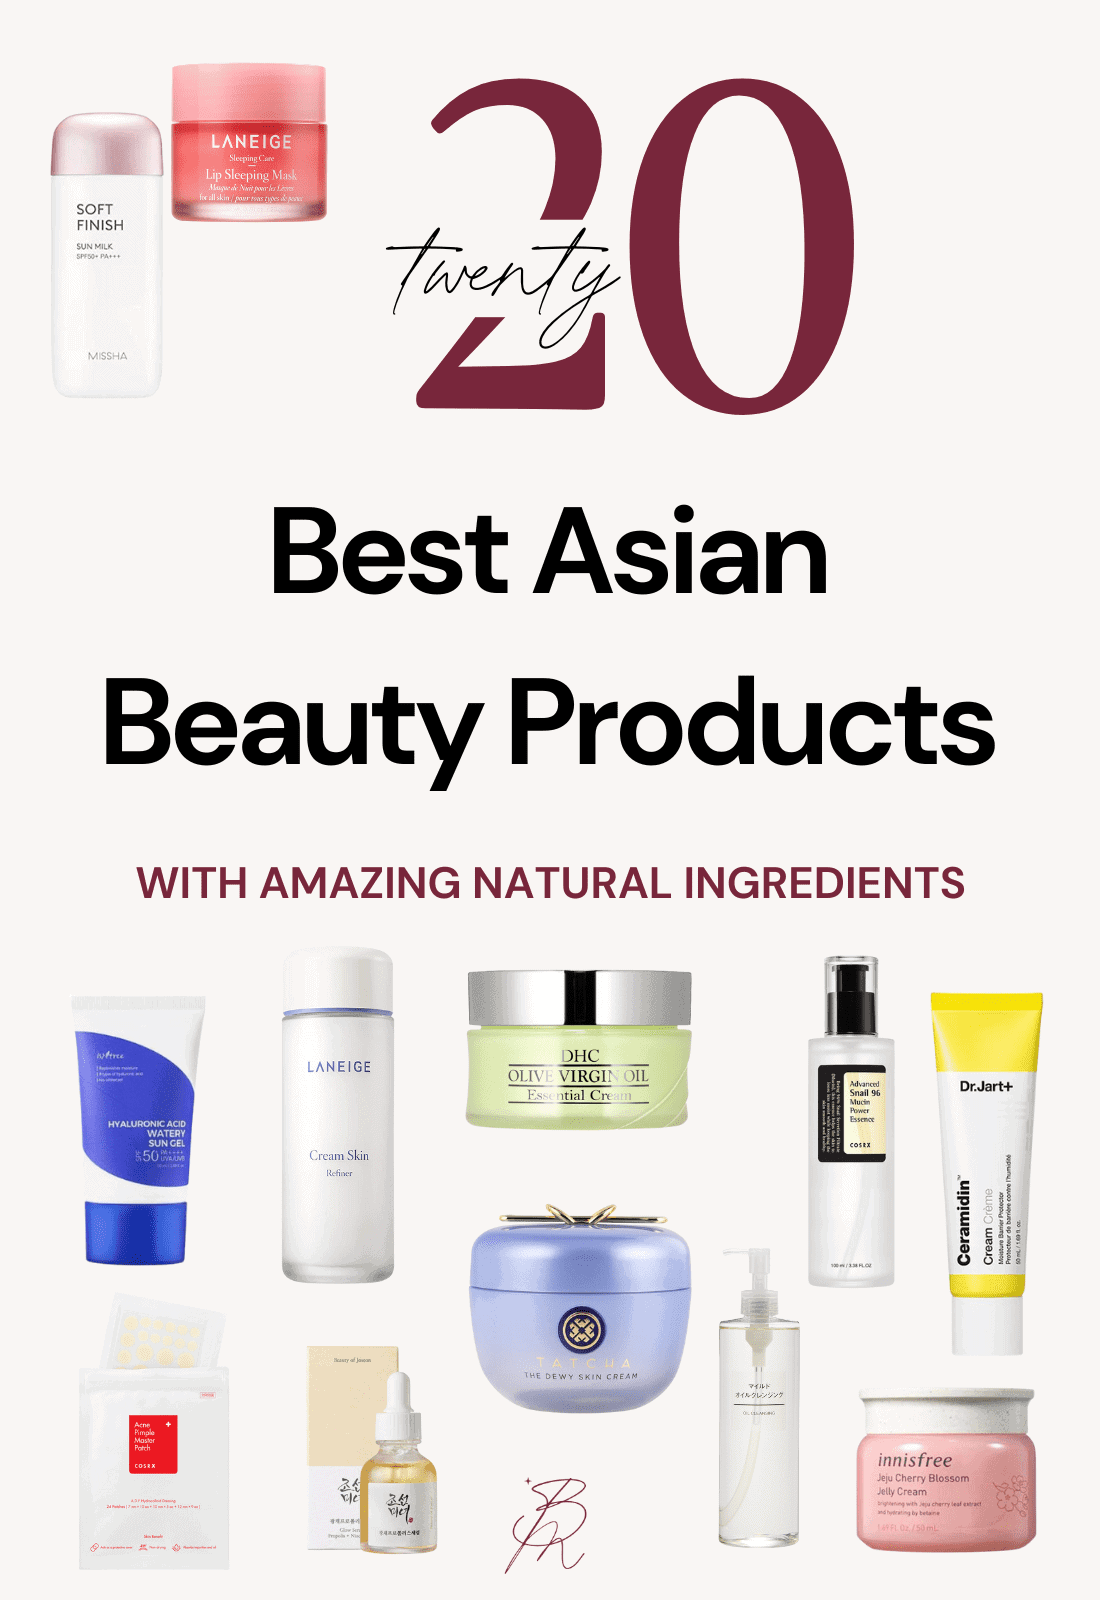 14 Best Asian Beauty Products To Fight Skin Concerns ⋆ Beautymone